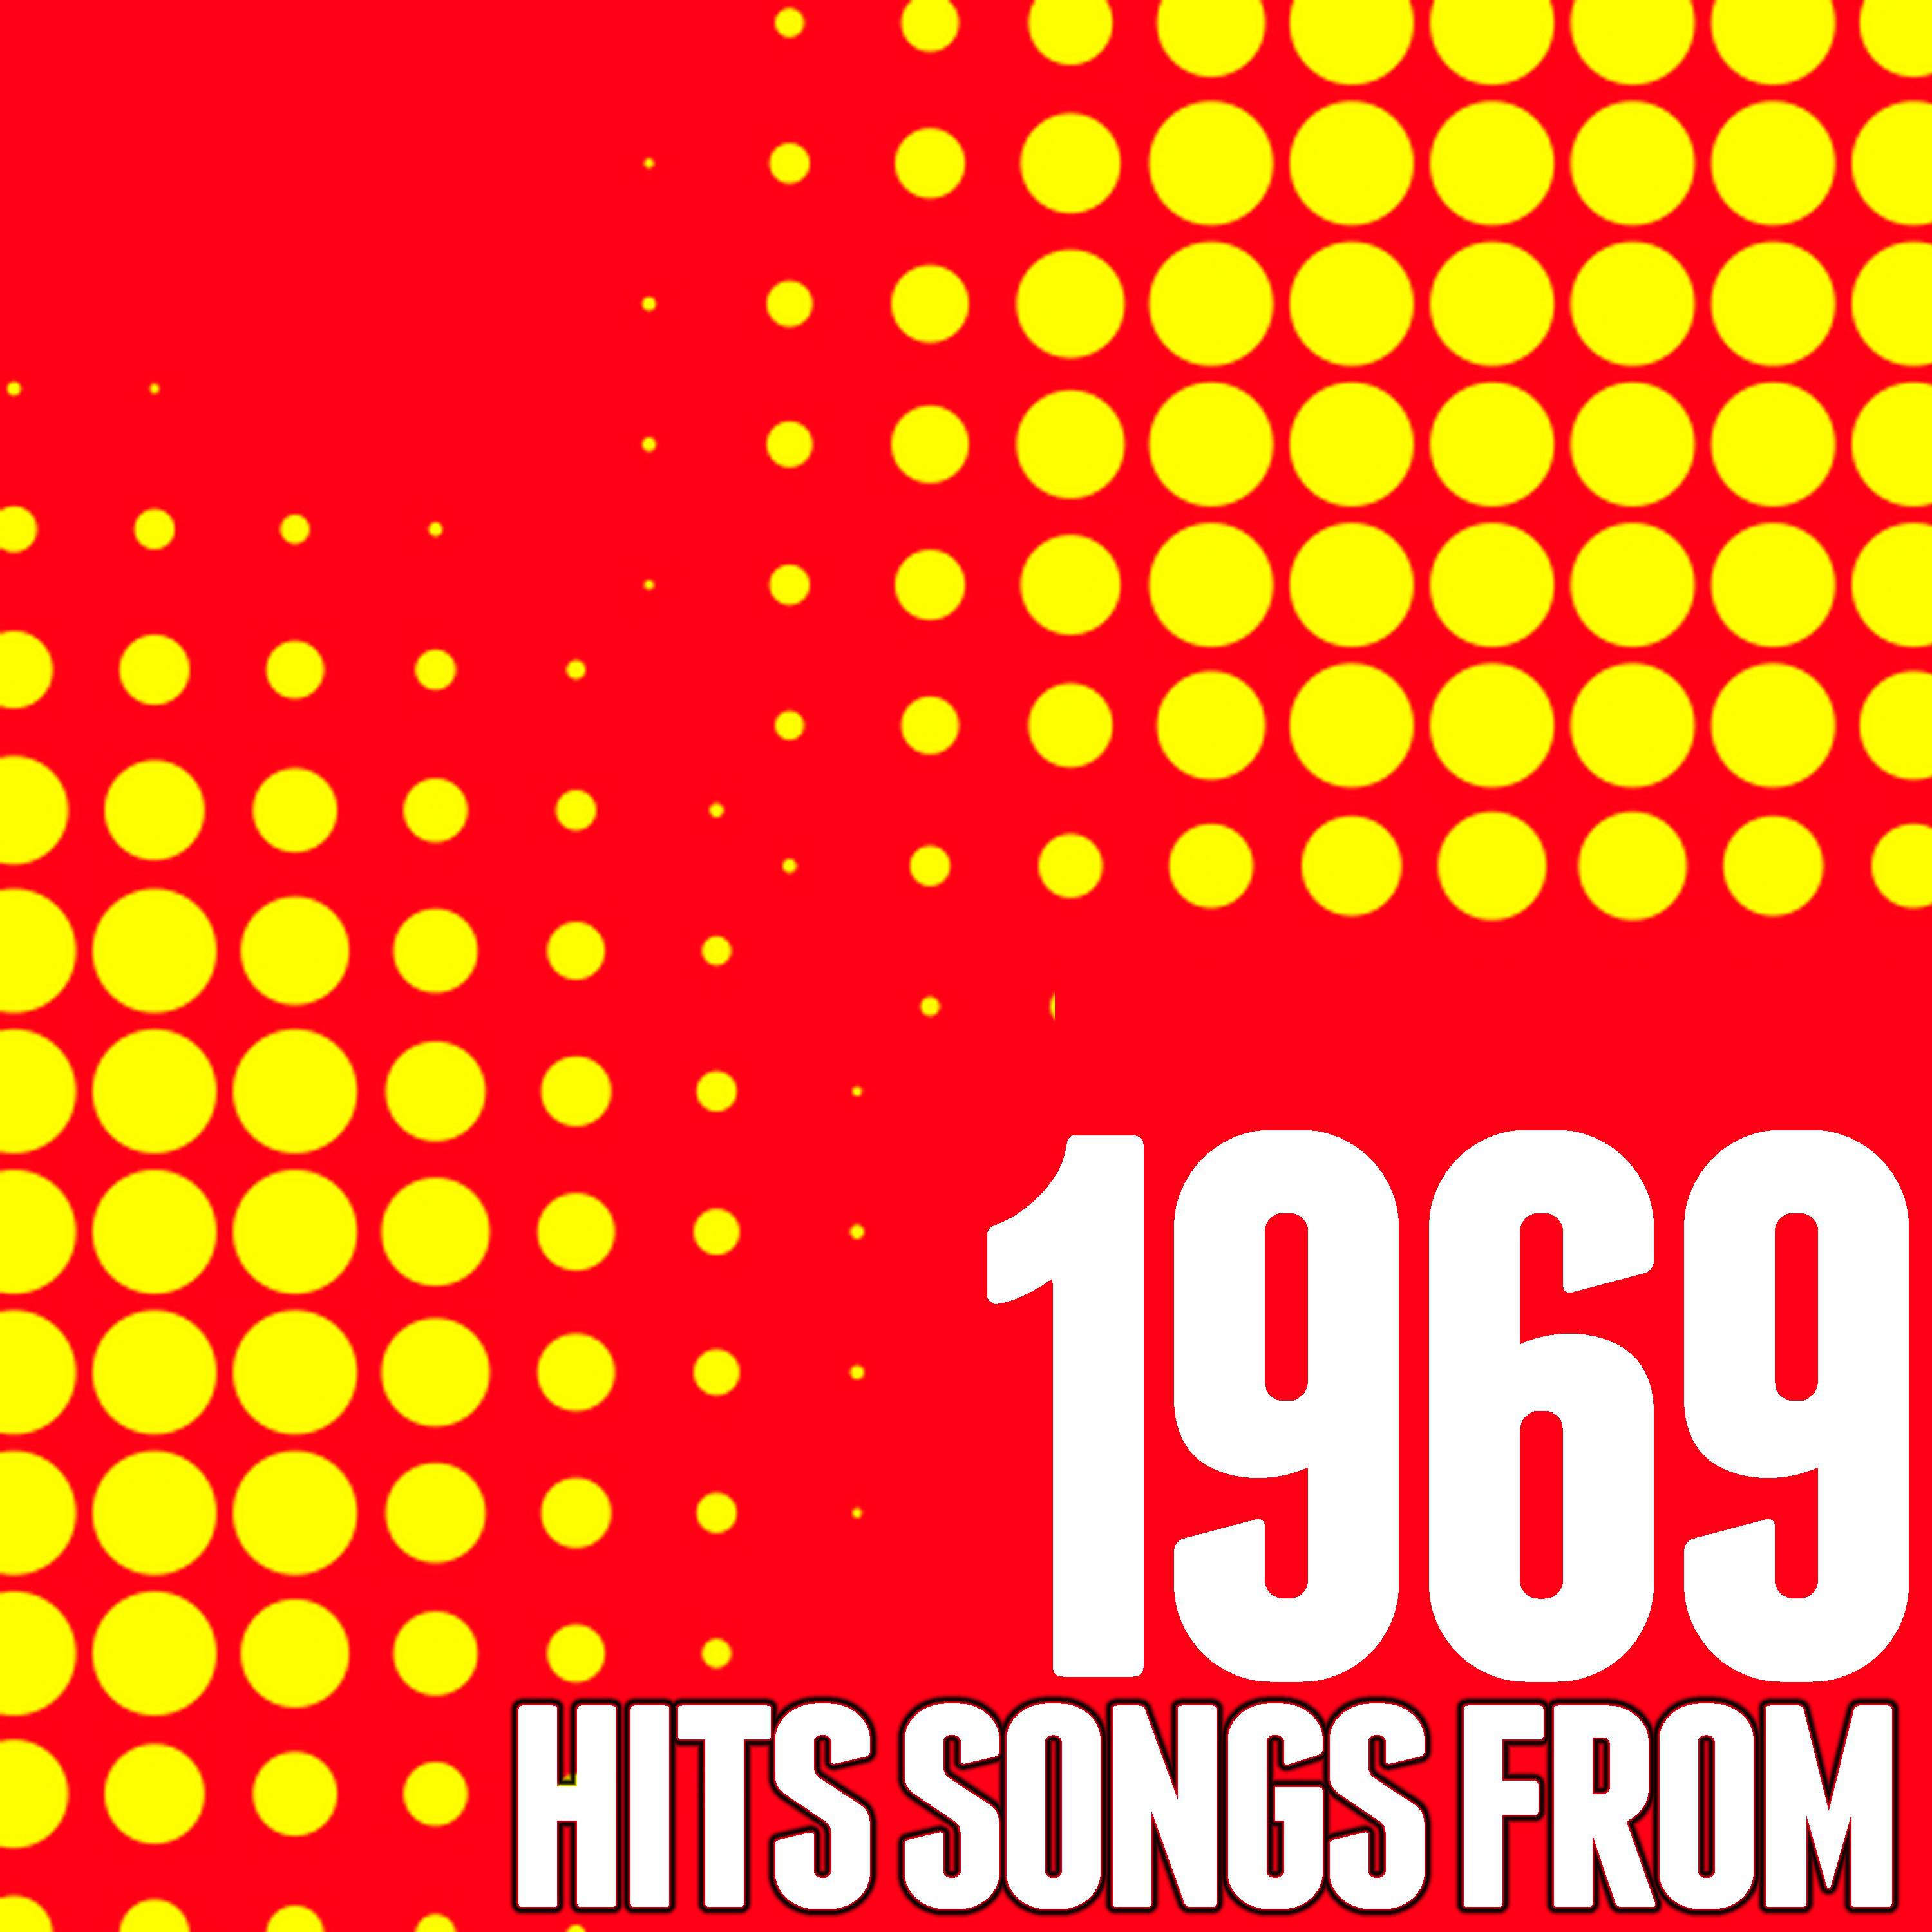 Hit Songs from 1969